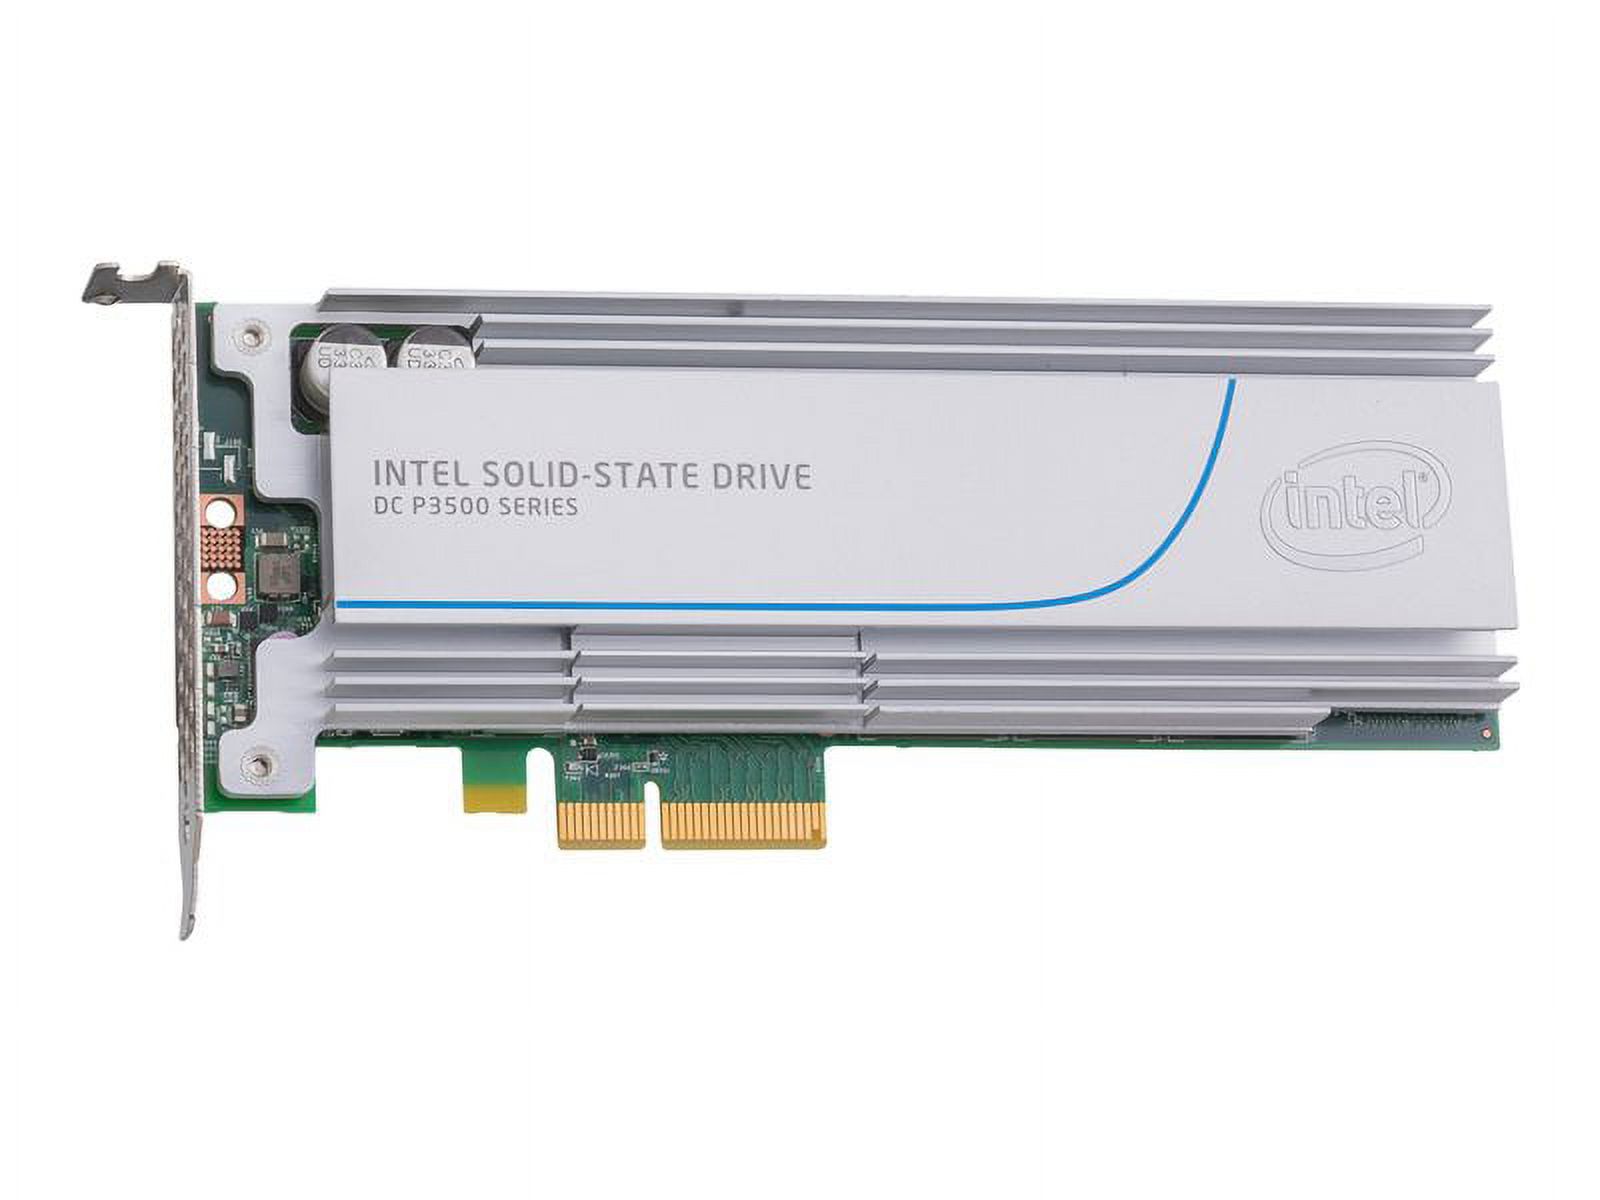 Intel Solid-State Drive DC P3500 Series - solid state drive - 1.2 TB - PCI Express 3.0 x4 (NVMe) - image 2 of 8